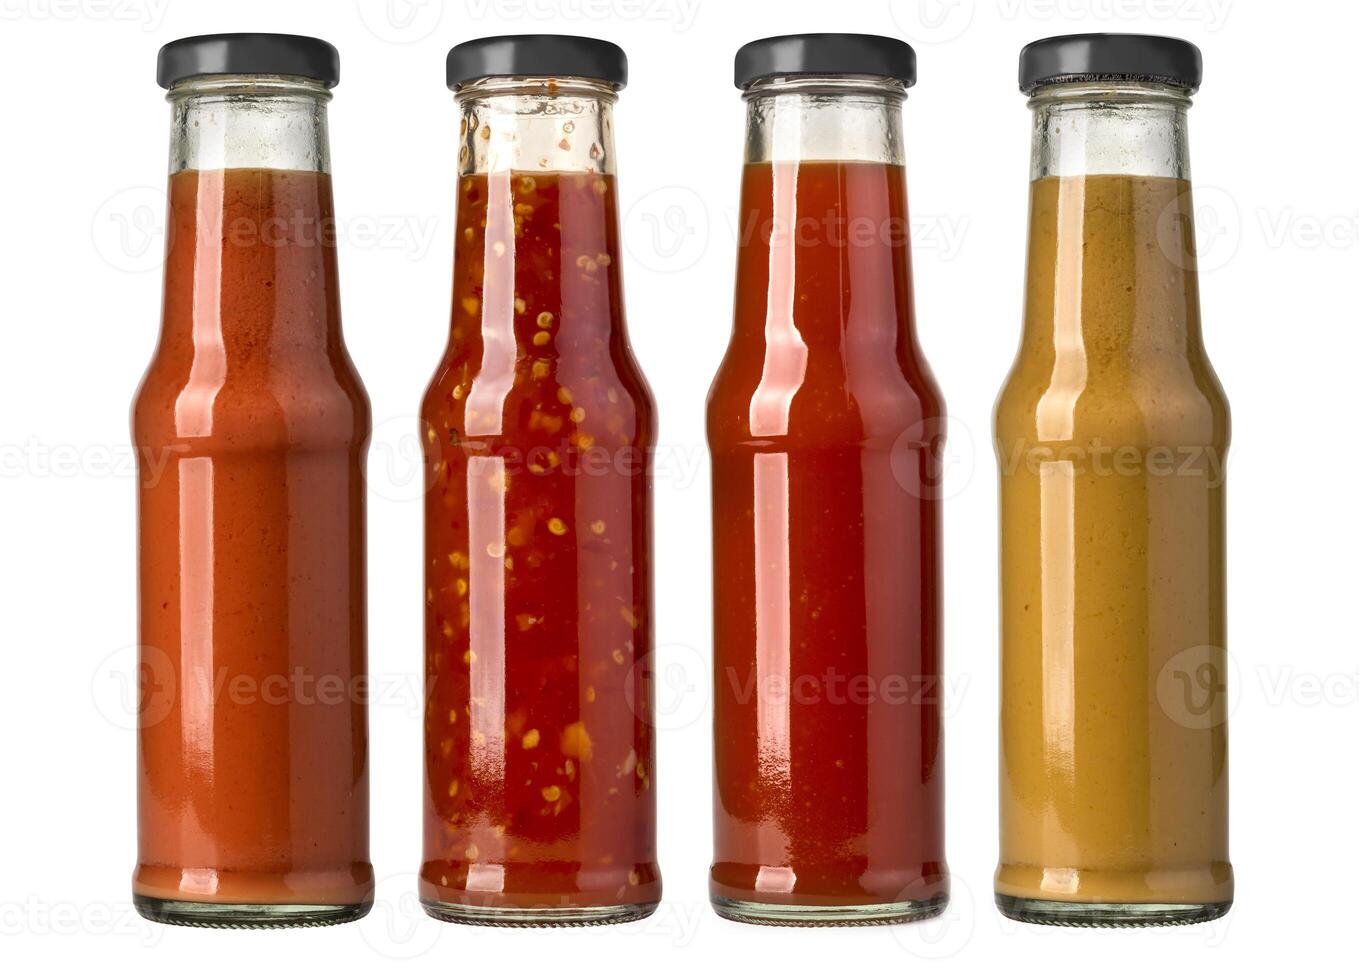 barbecue sauces in glass bottles photo